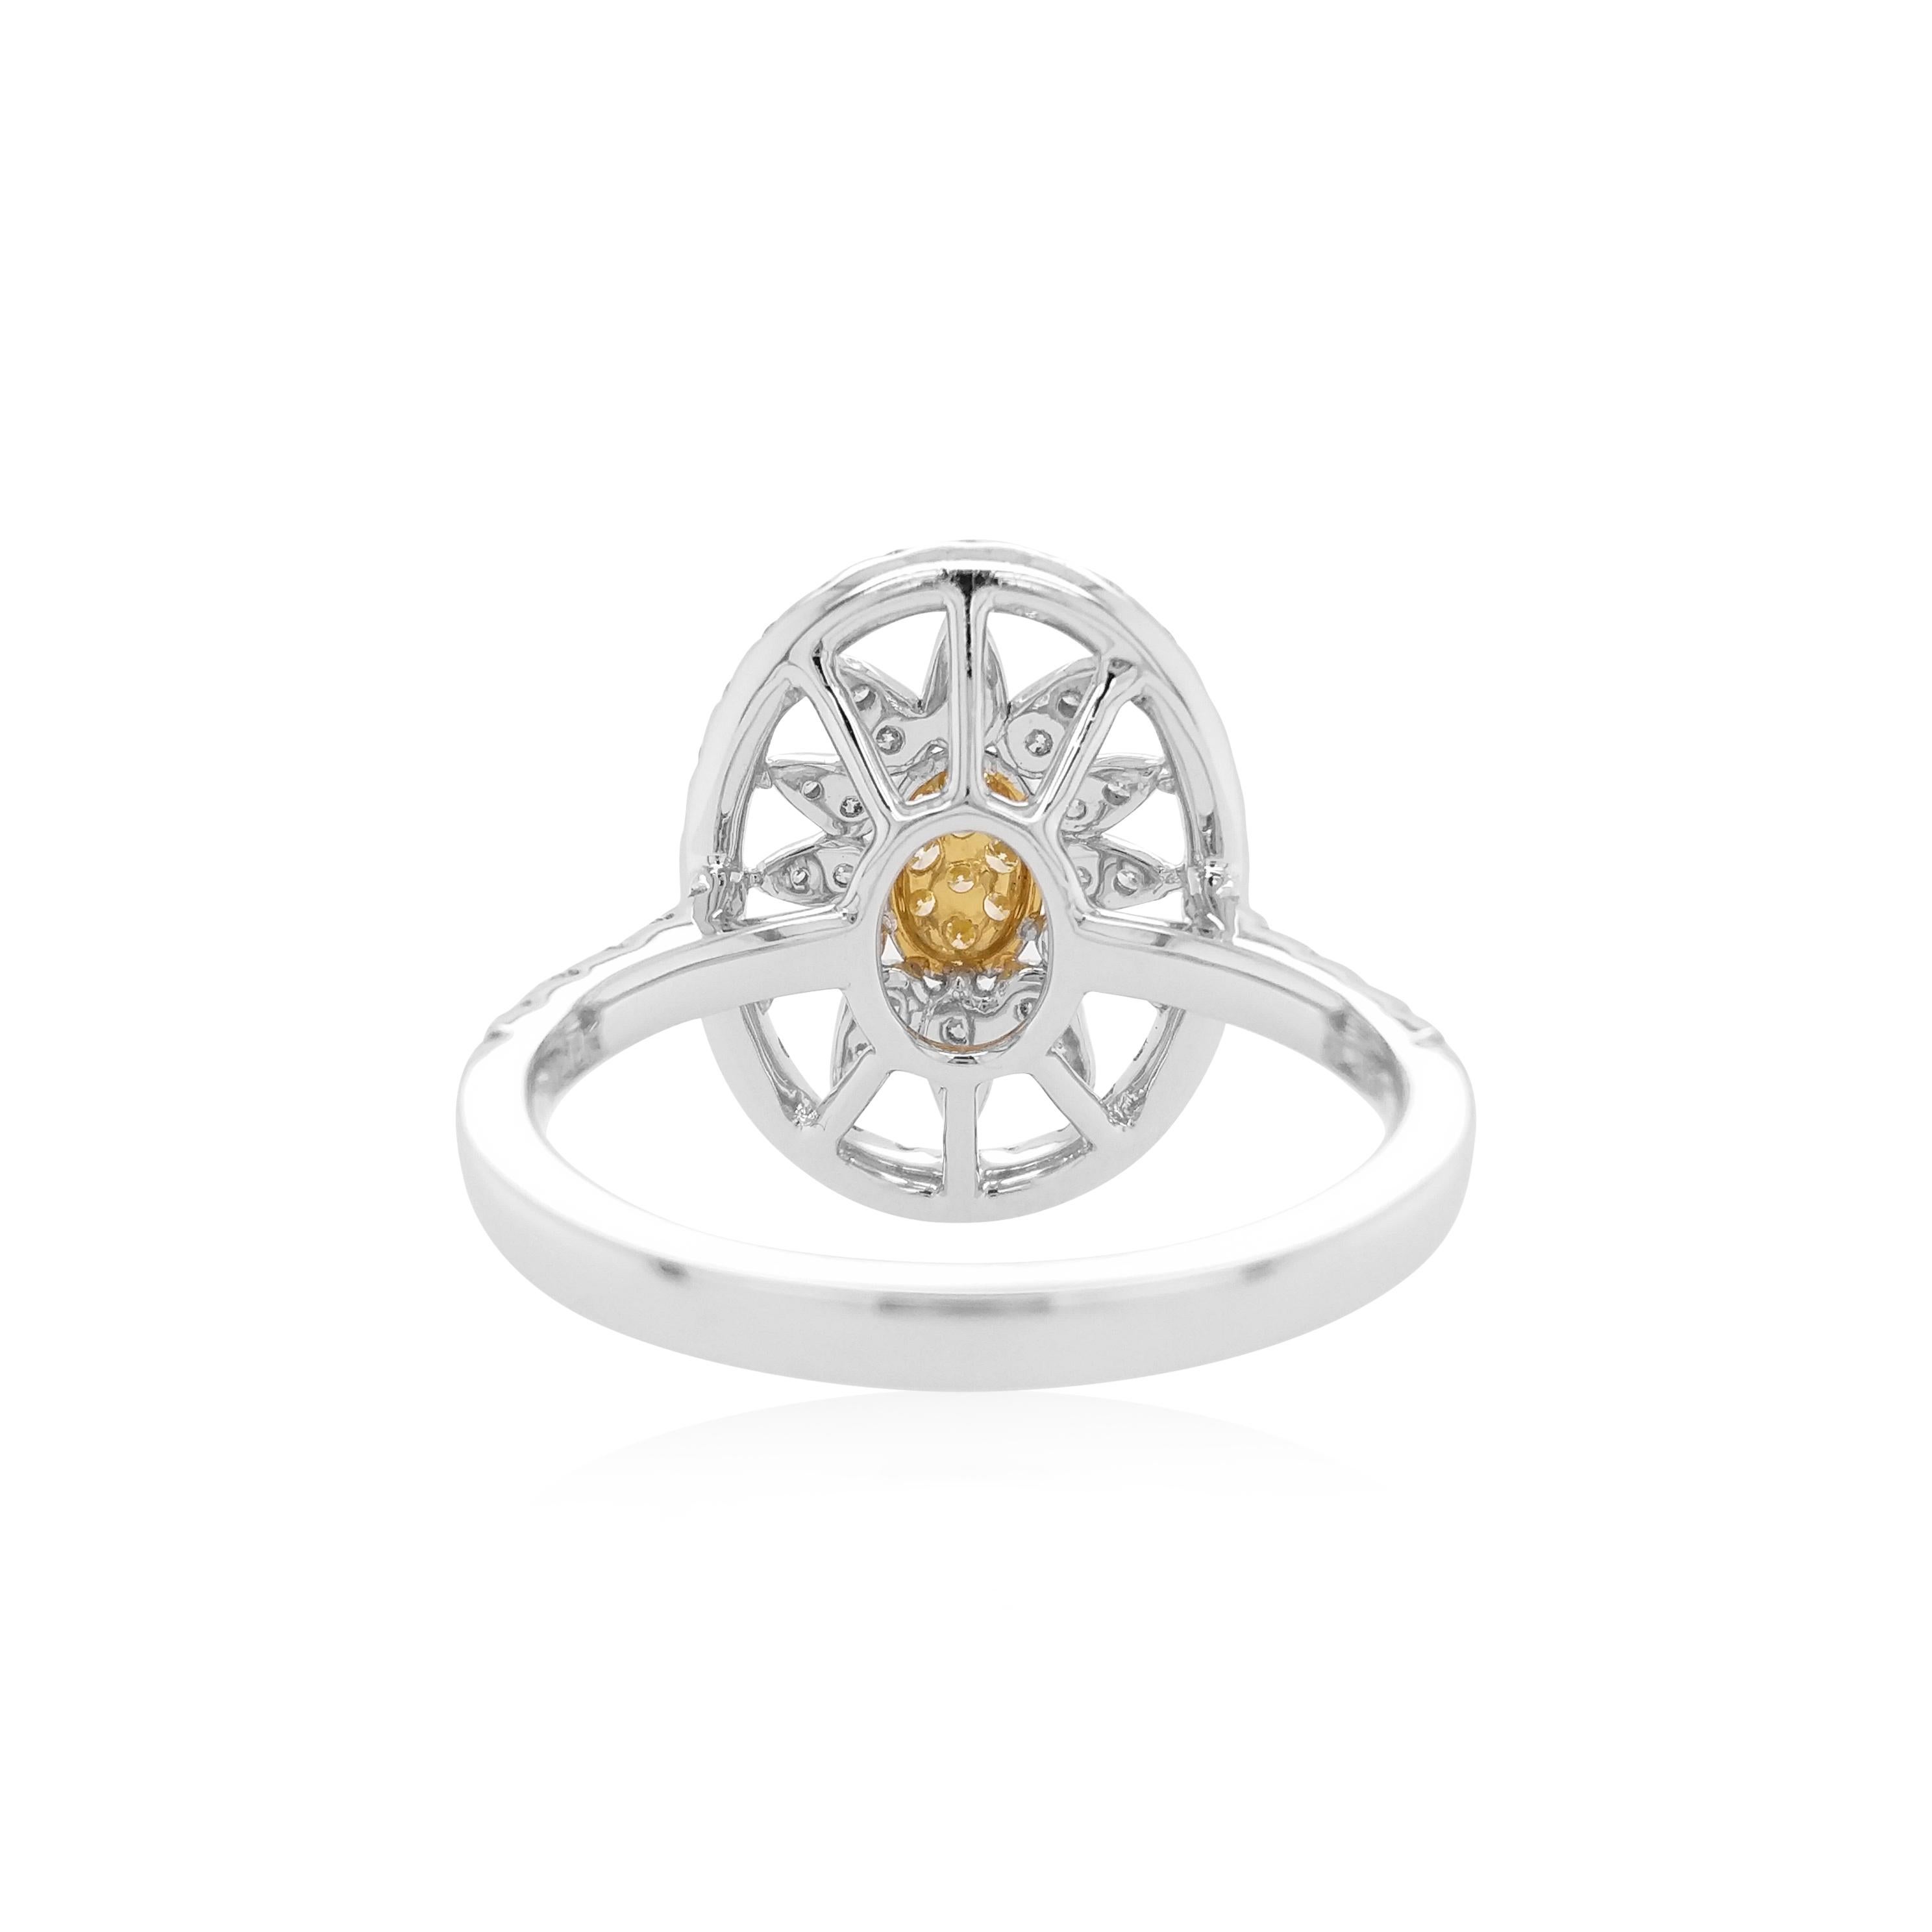 This unique ring features striking natural Yellow diamonds at its centre, surrounded by a bold pattern scintillating white diamonds. The perfect piece to take you from day to night, this ring will elevate any outfit - especially when paired with the